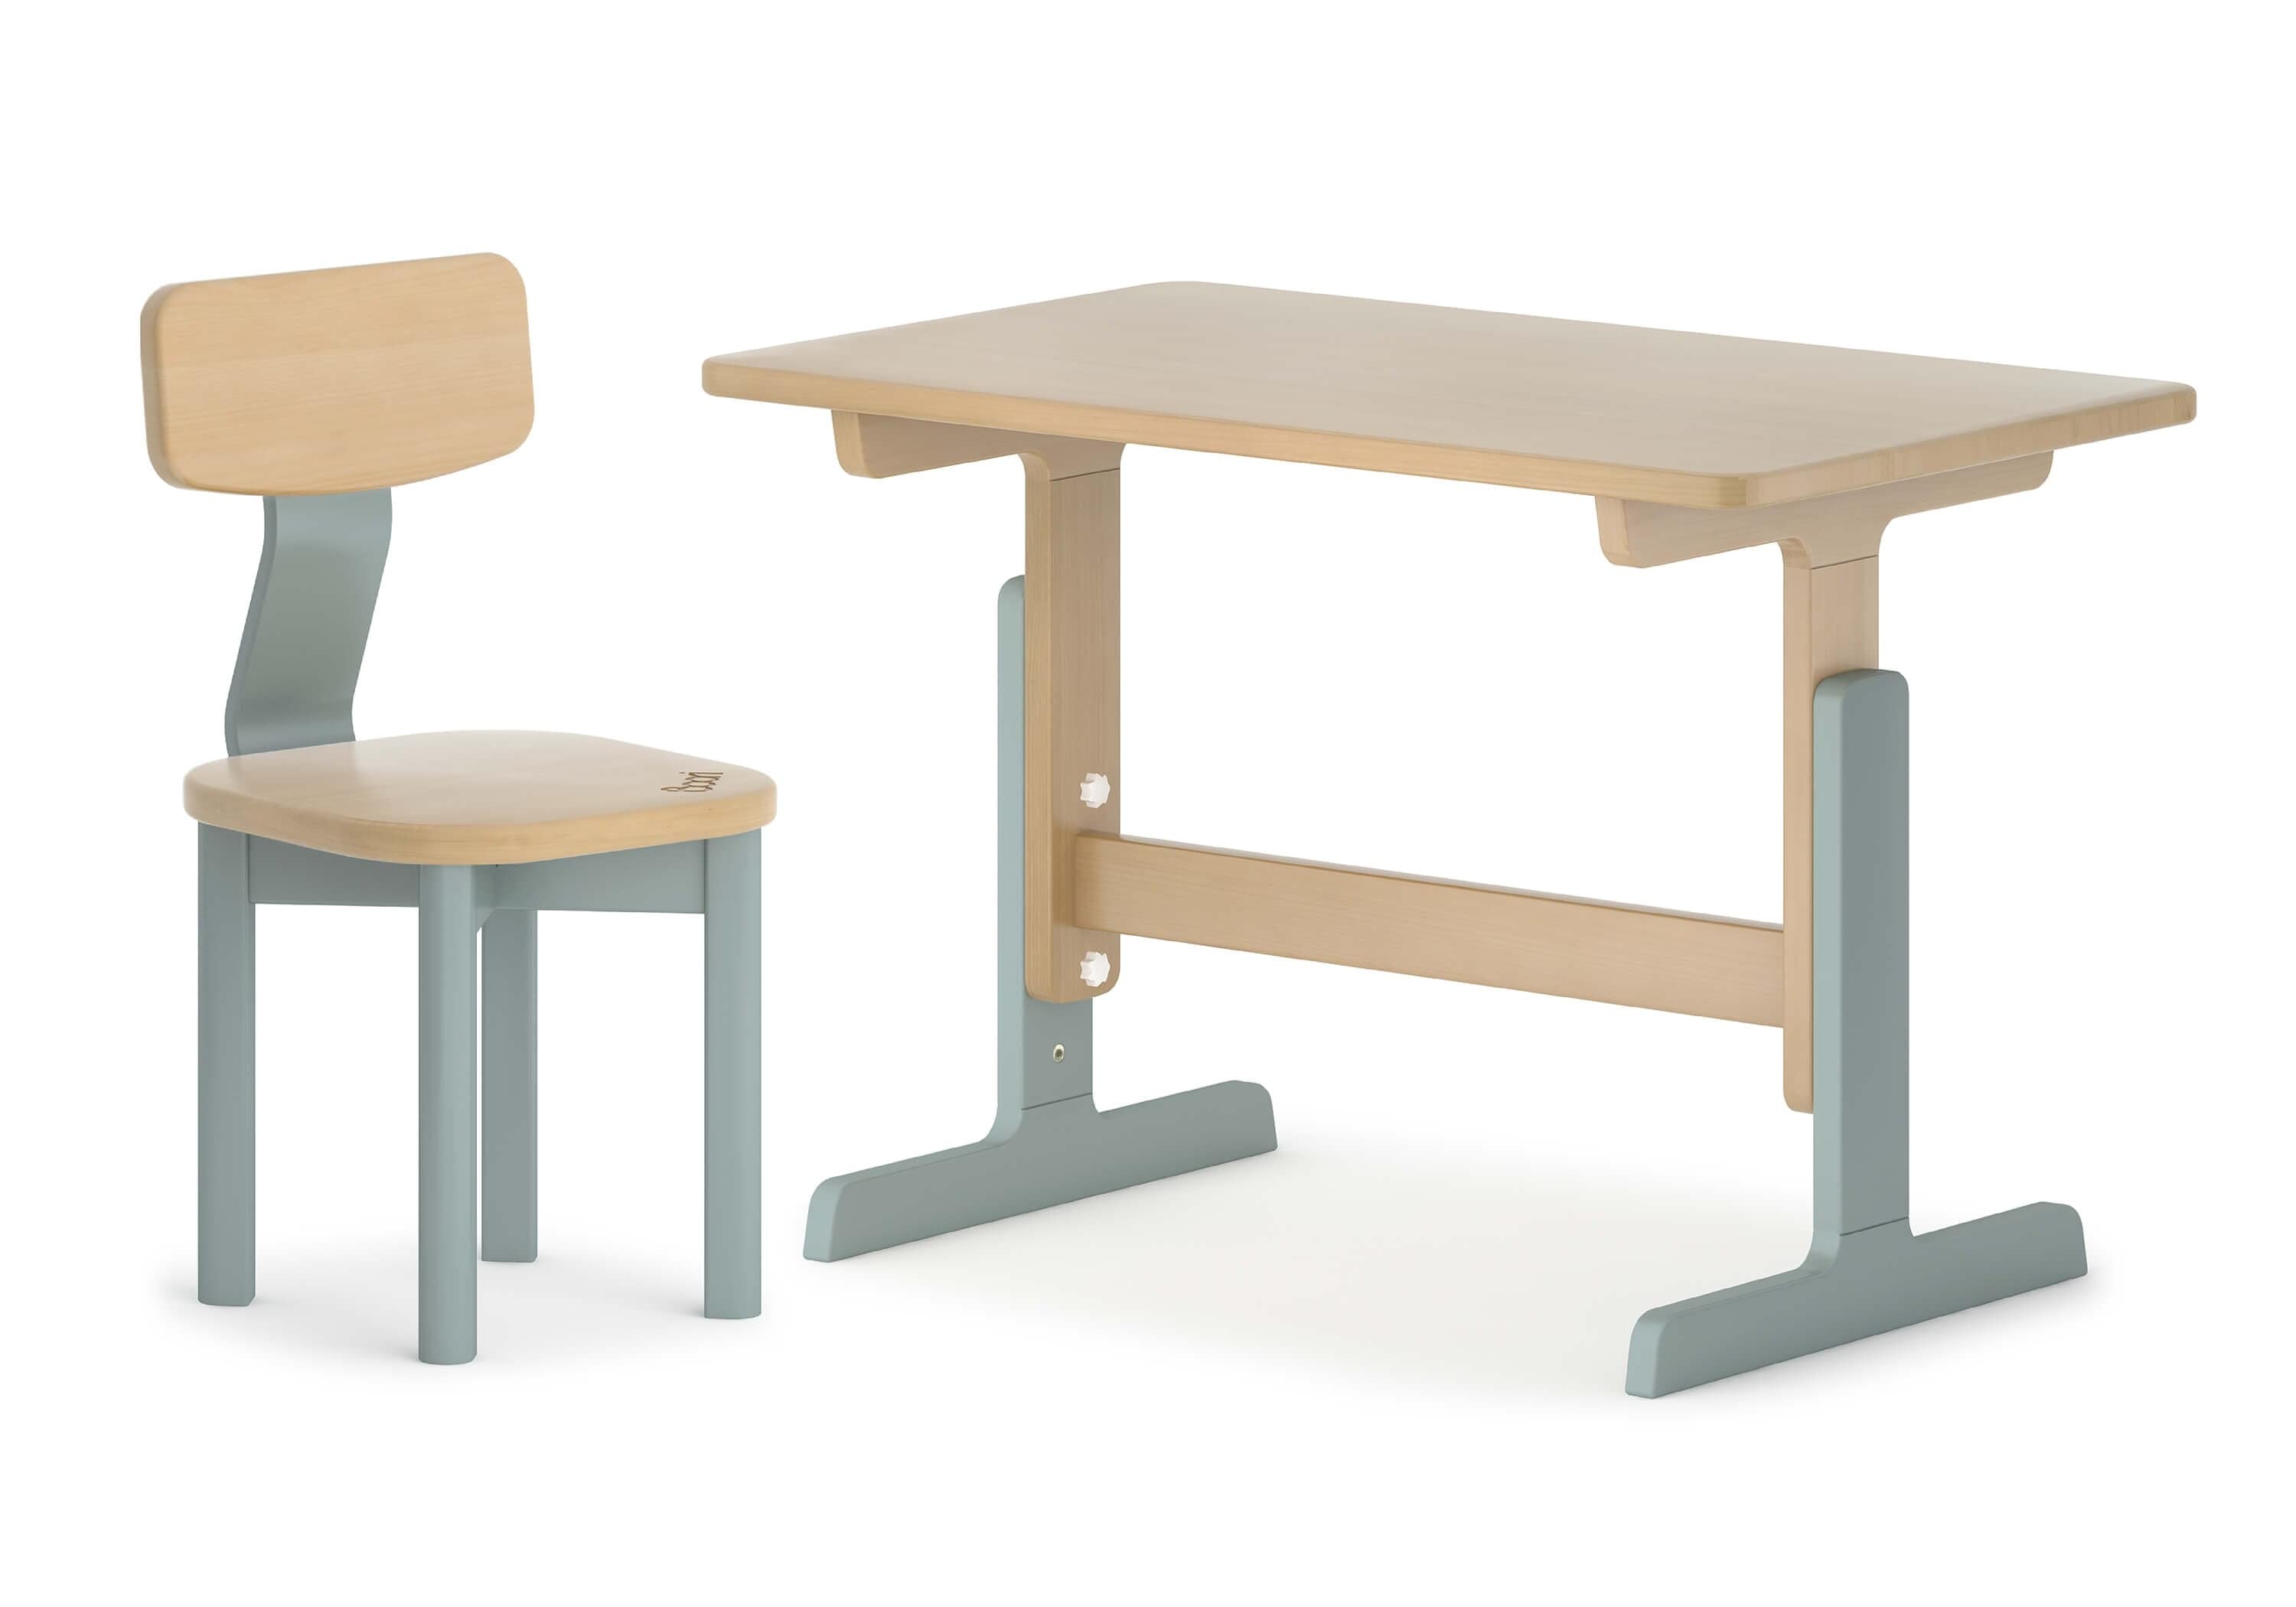 Boori Table & Chairs Blueberry & Almond Boori Tidy Learning Table & Chair Bundle - Direct Delivery